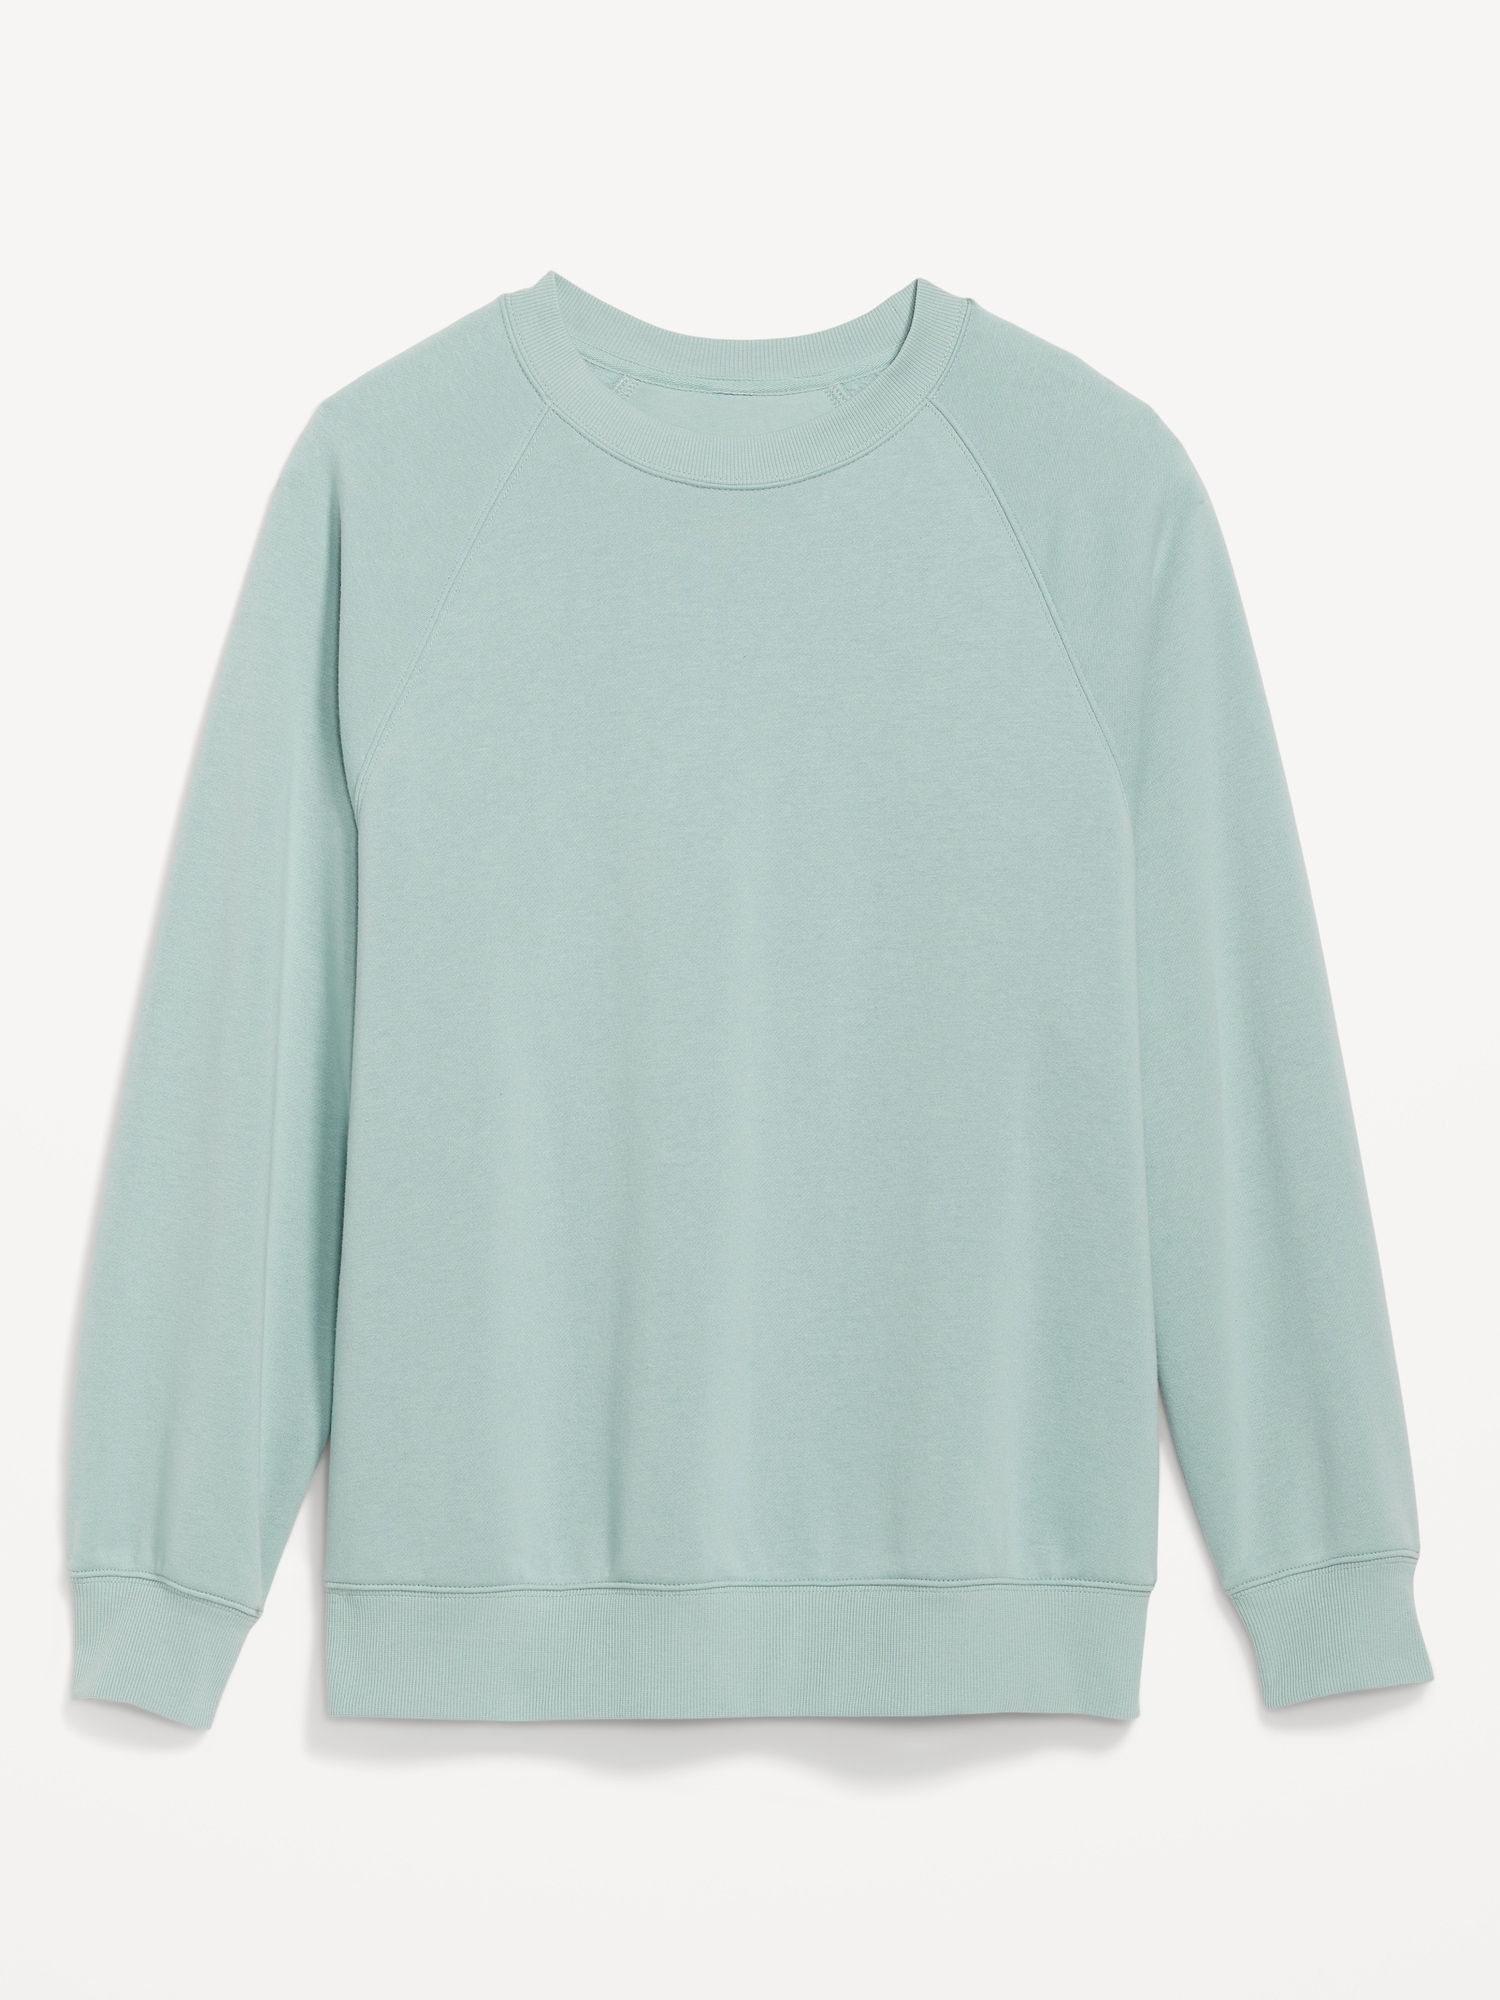 Oversized French Terry Tunic Sweatshirt for Women | Old Navy